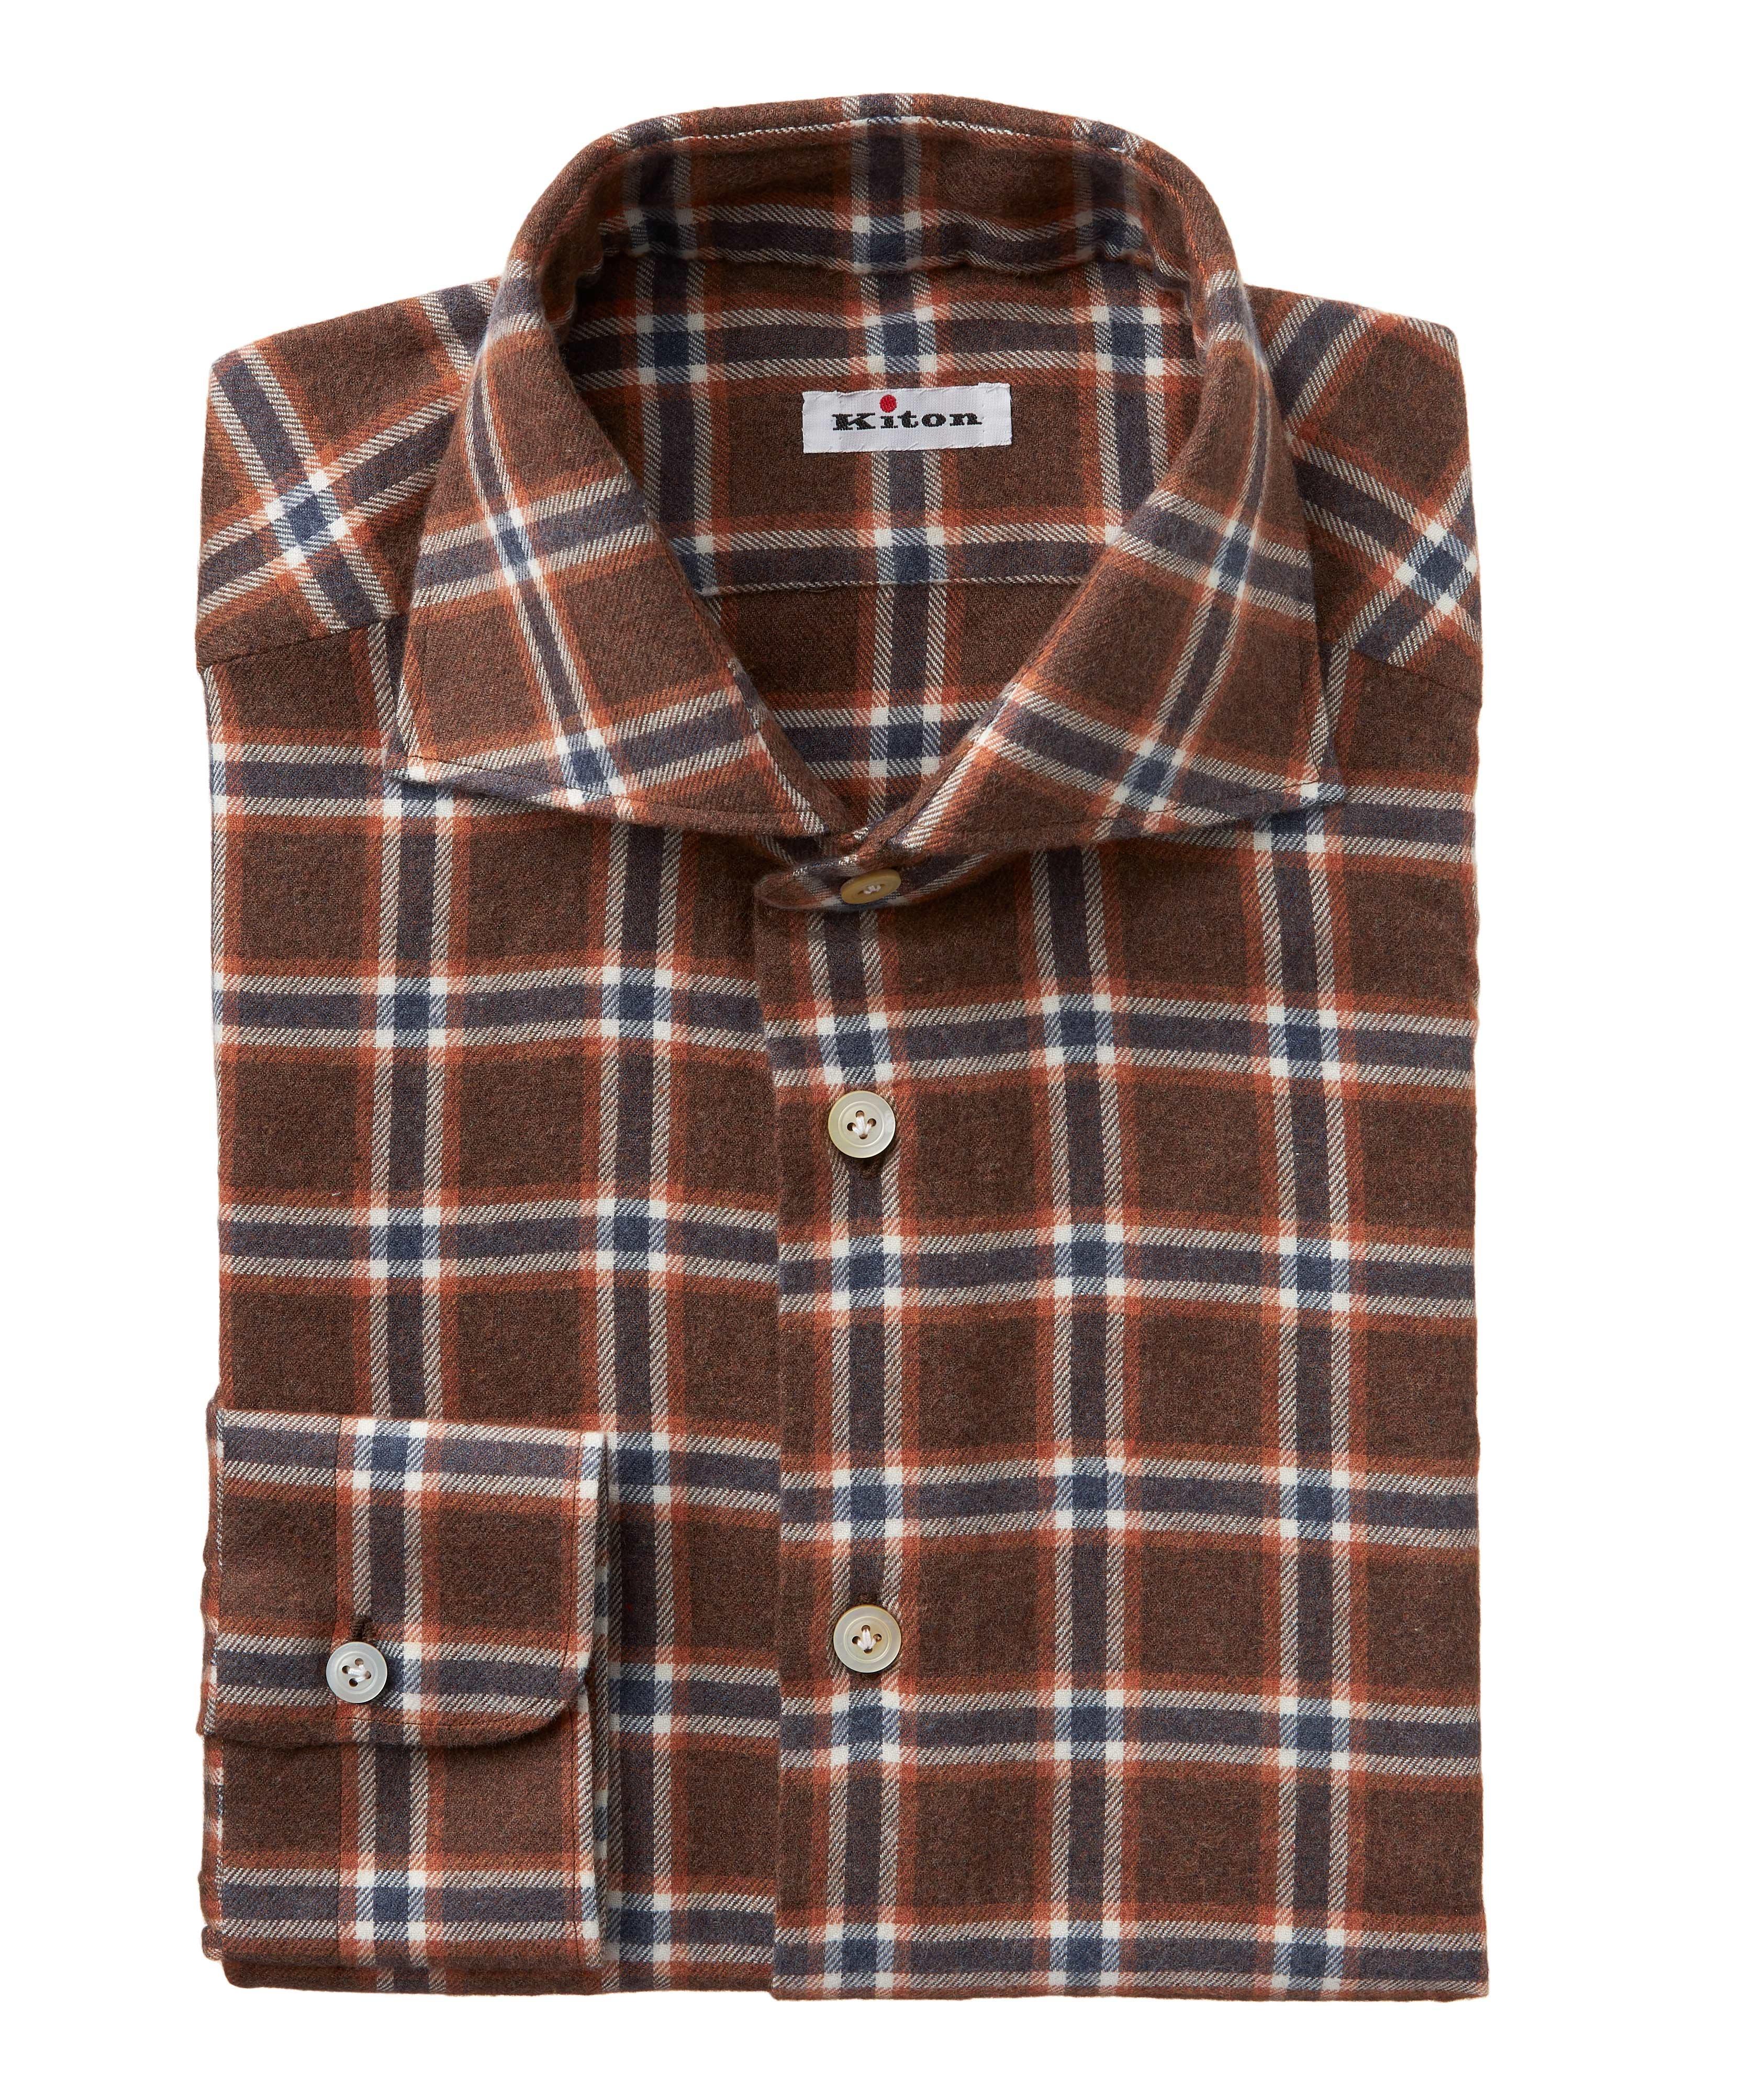 Flannel Checked Pattern Cotton Sport Shirt image 0